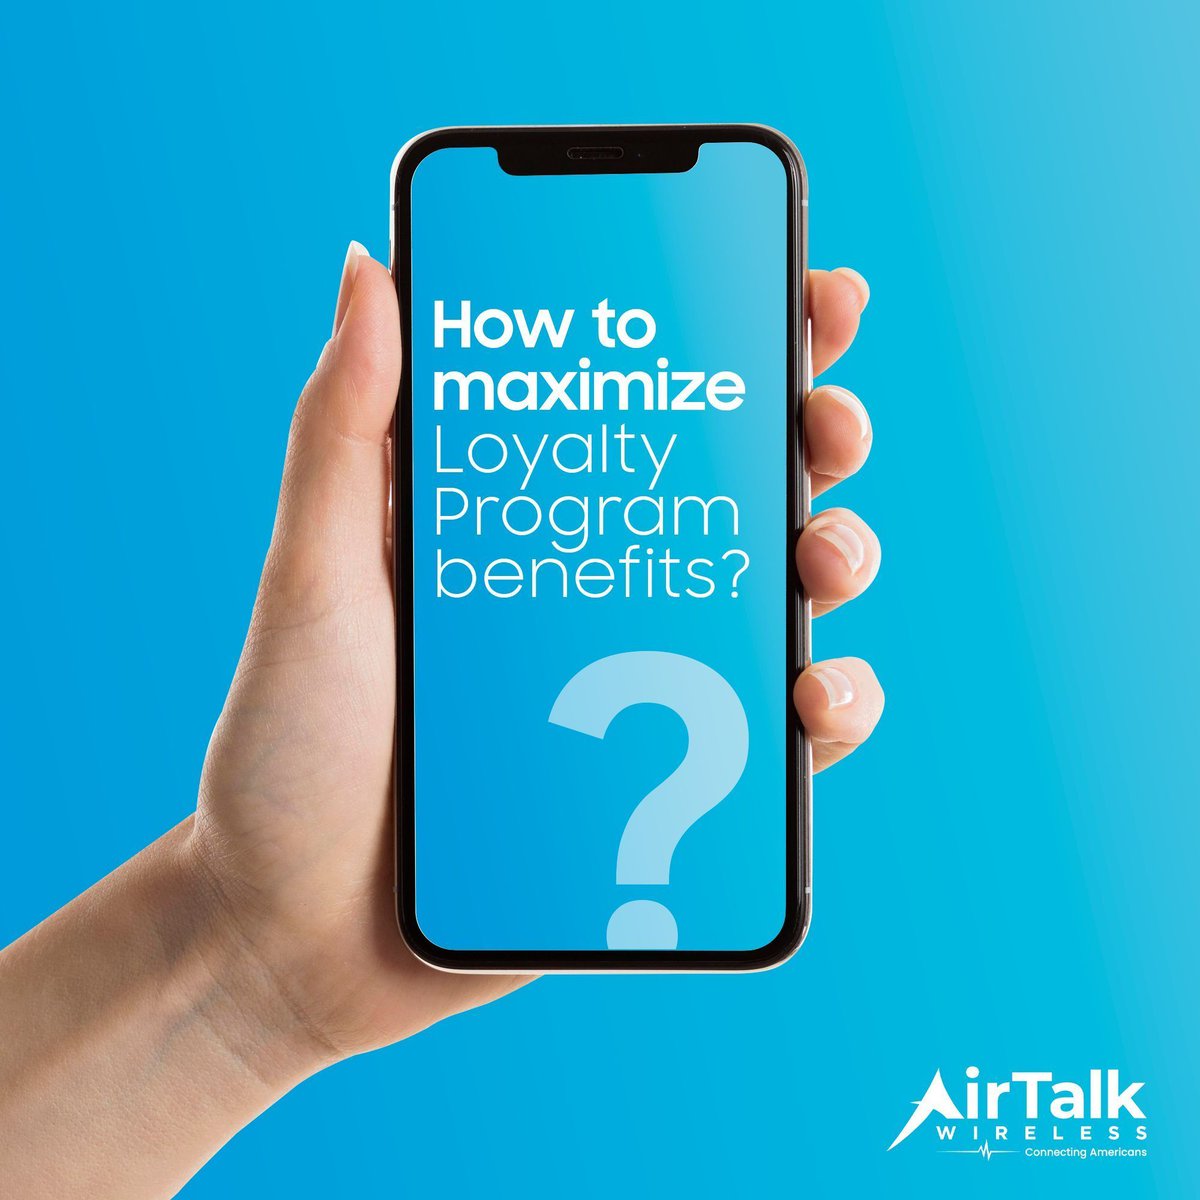 🤔 Did you know the AirTalk Loyalty Program offers numerous exciting rewards through very simple participation? ➡️ See how it operates and how to maximize its benefits, here🌐: buff.ly/4bVXTGO  
#AirTalkLoyalty #AirTalkReferral #RewardYourself #JoinNow